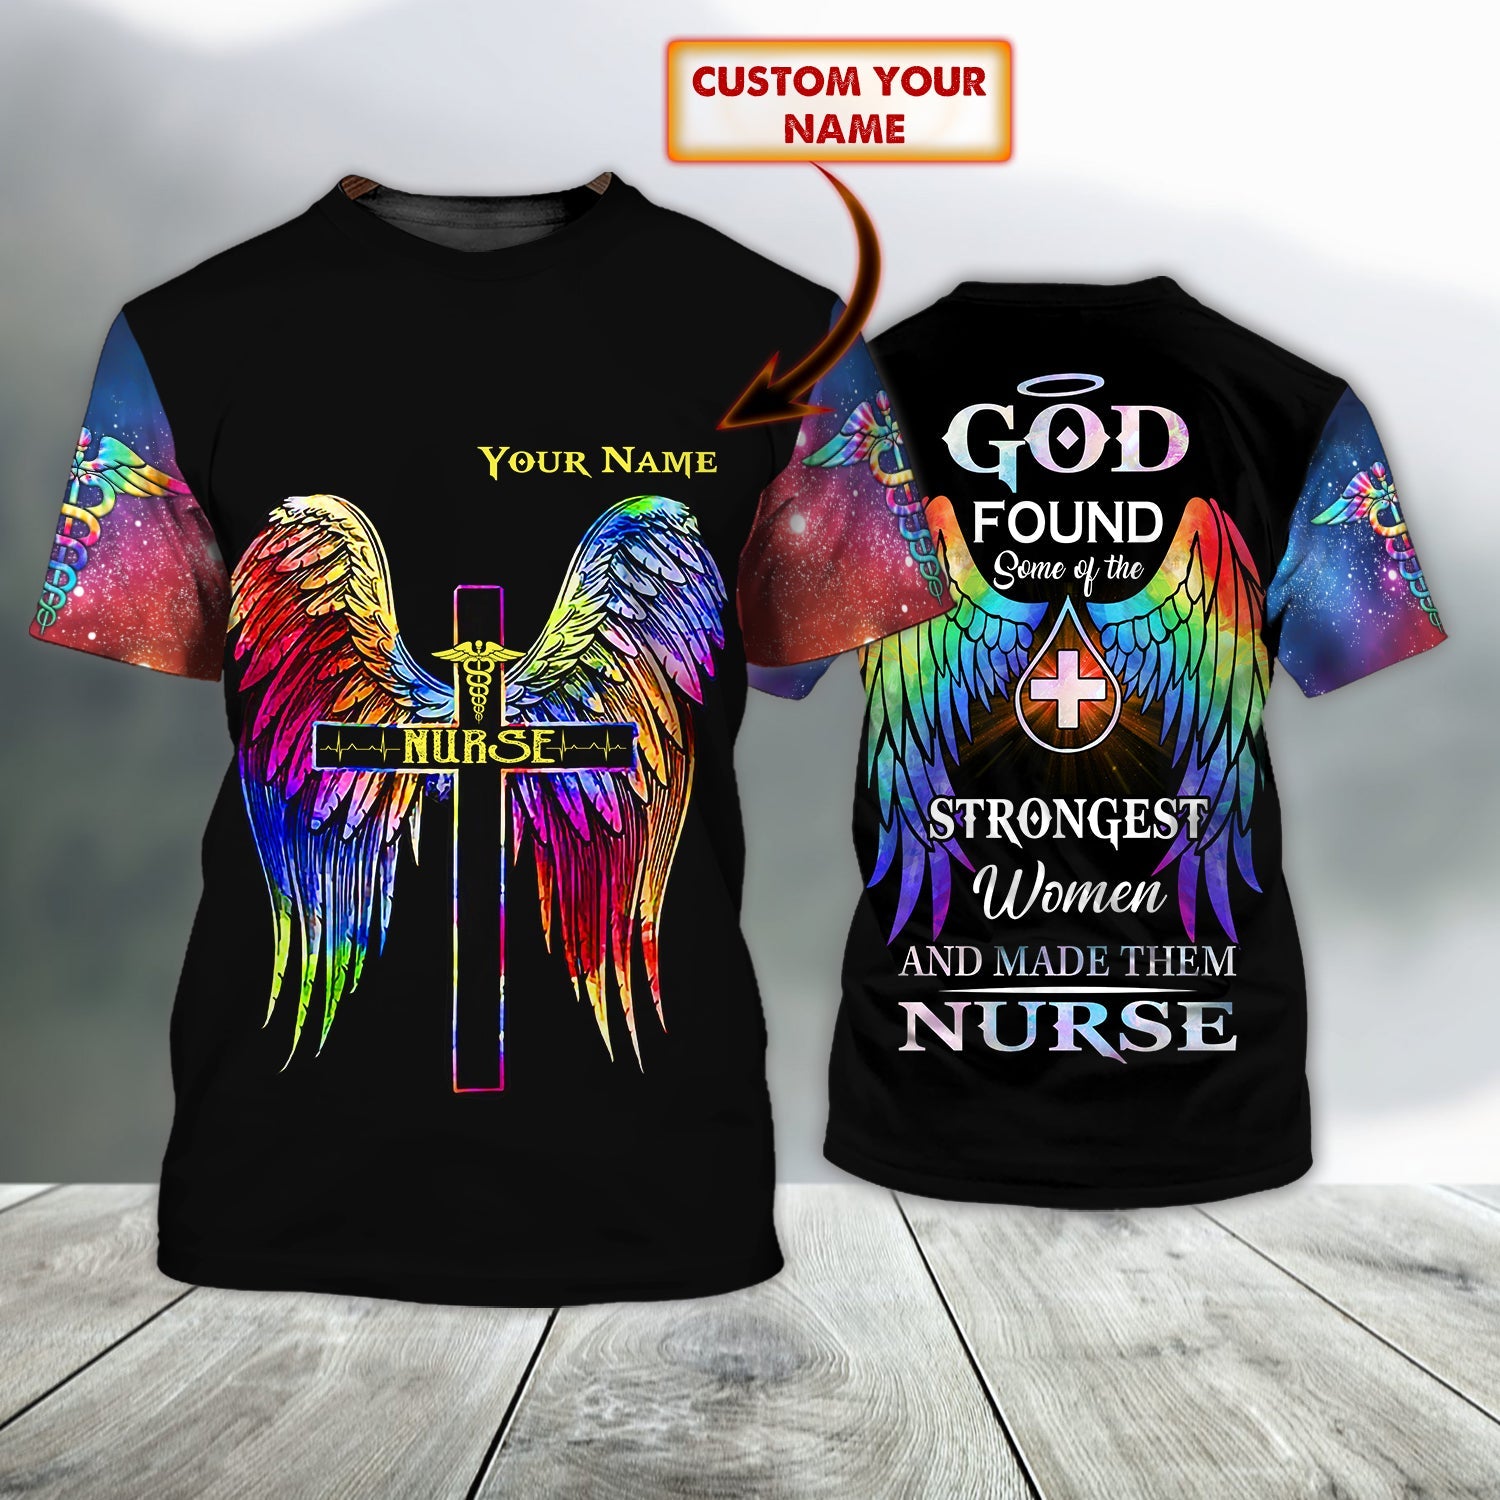 Nurse - Personalized Name 3D T-Shirt/ God Found Some Of The Strongest Women and Make Them Nurse